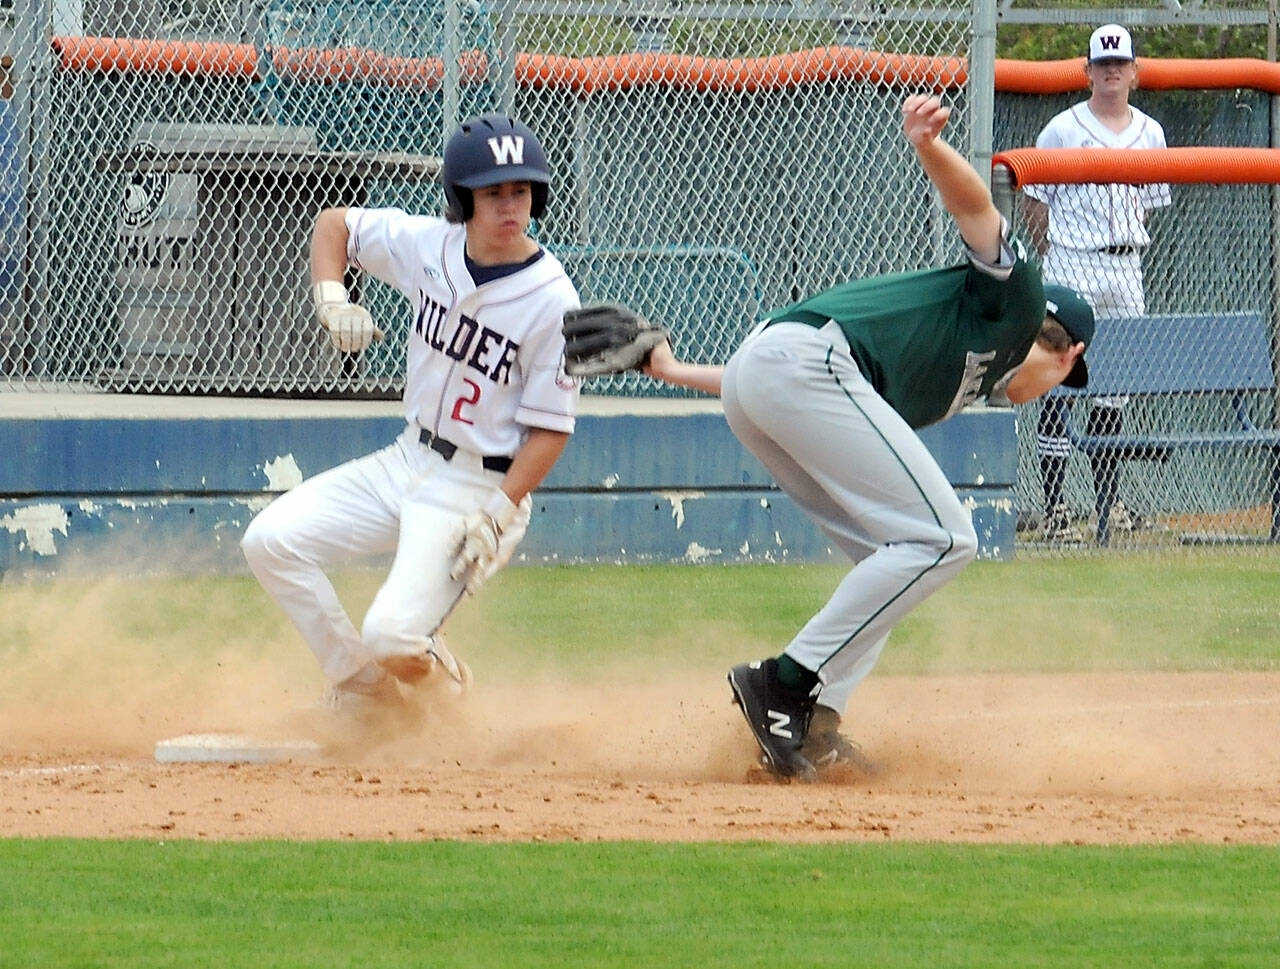 Wilder Senior’s Alex Angevine, left, makes it to third as Lakeside Recovery Senior third baseman Carter DuBreuil struggles with an errant throw on Saturday afternoon at Port Angeles Civic Field. (Keith Thorpe/Peninsula Daily News)